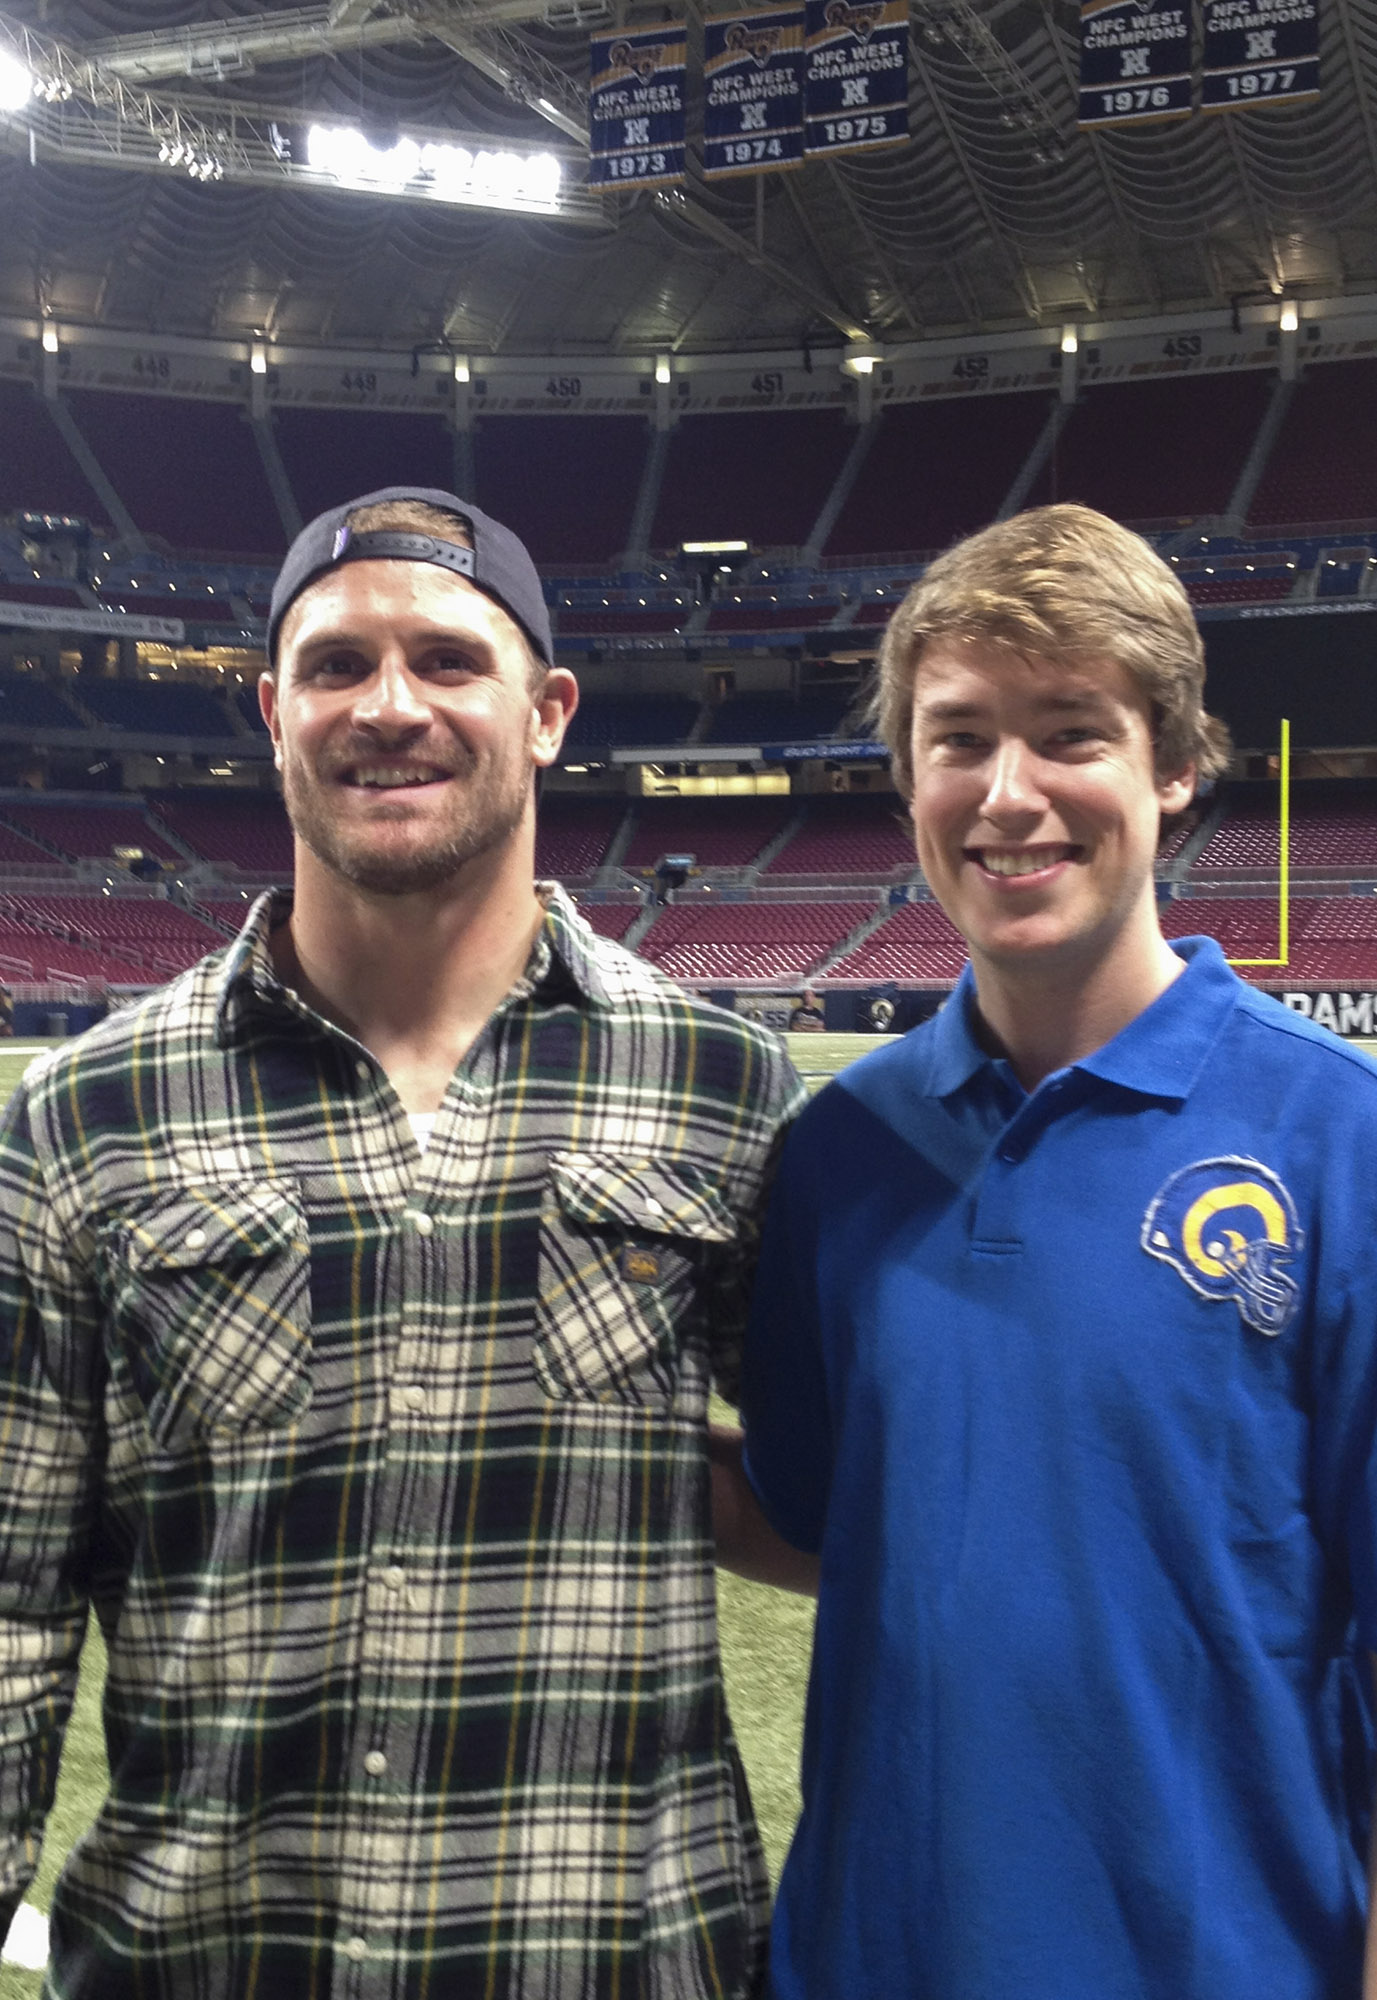 Chris Long, left, and Gunter, right standing in the LA Rams' stadium